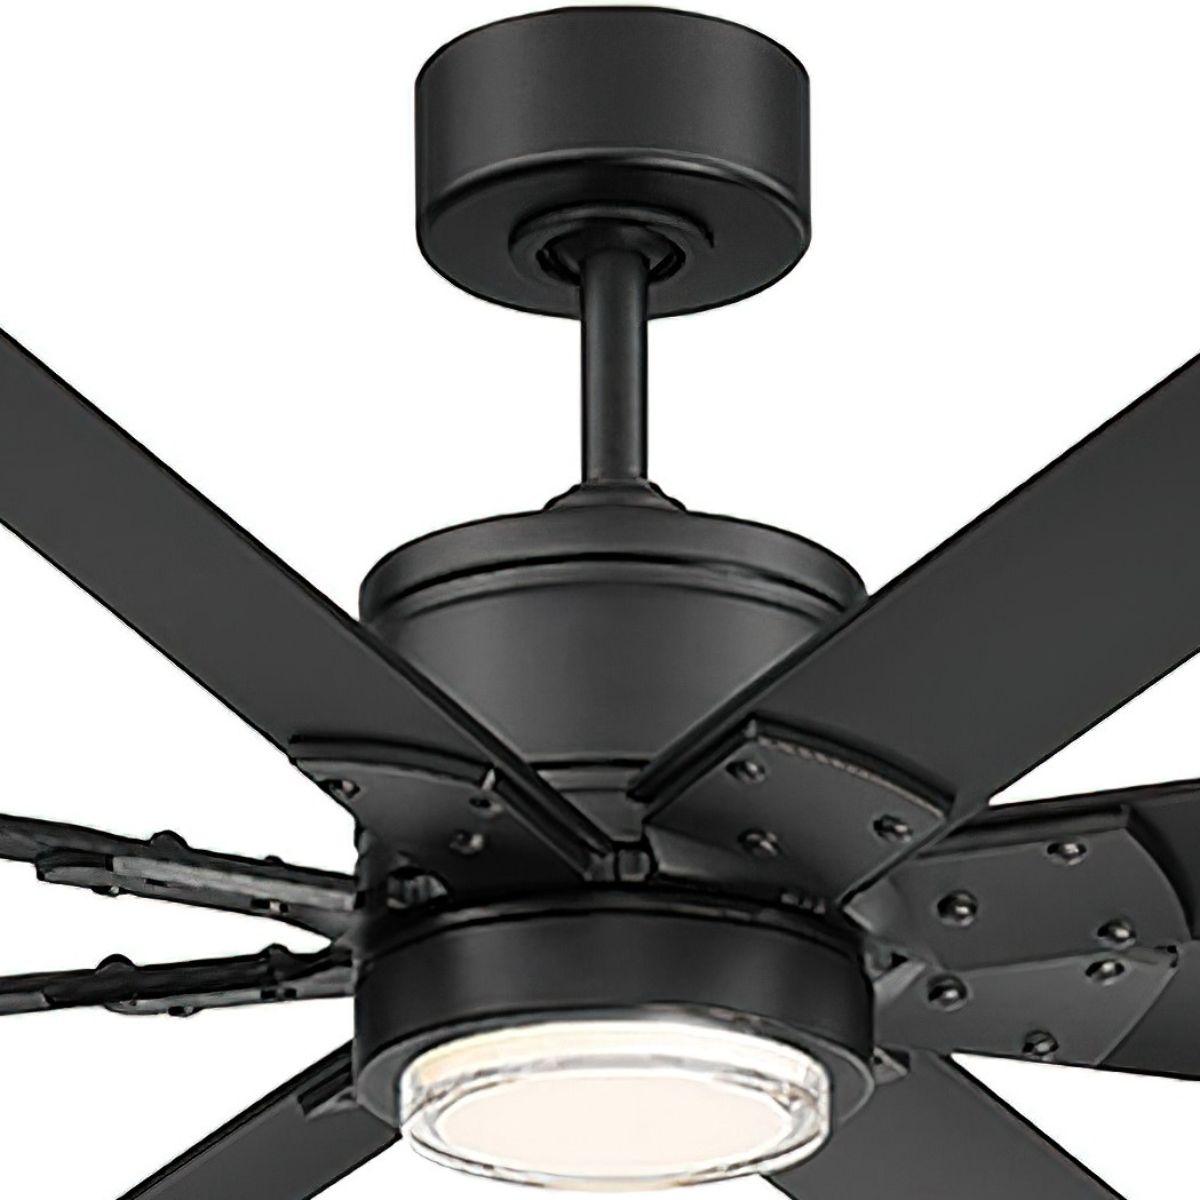 Renegade 52 Inch Windmill Outdoor Smart Ceiling Fan With Light And Remote, Matte Black Finish - Bees Lighting